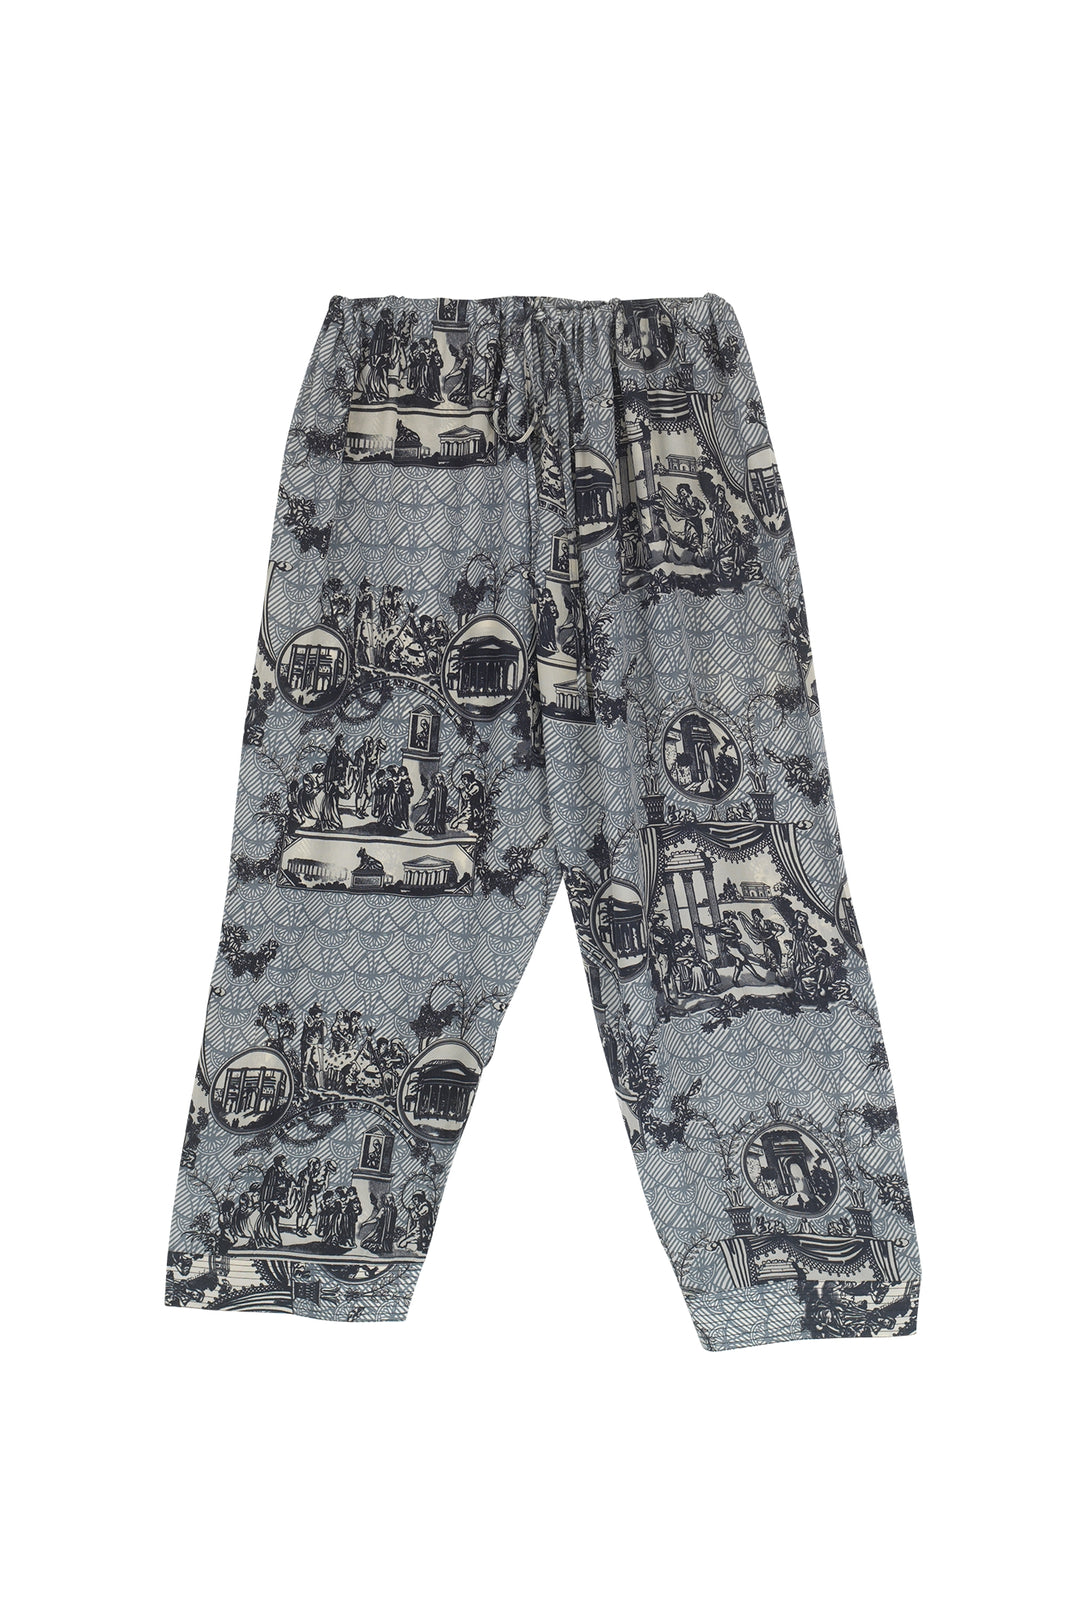 Women's lounge pants in ancient columns charcoal print by One Hundred Stars